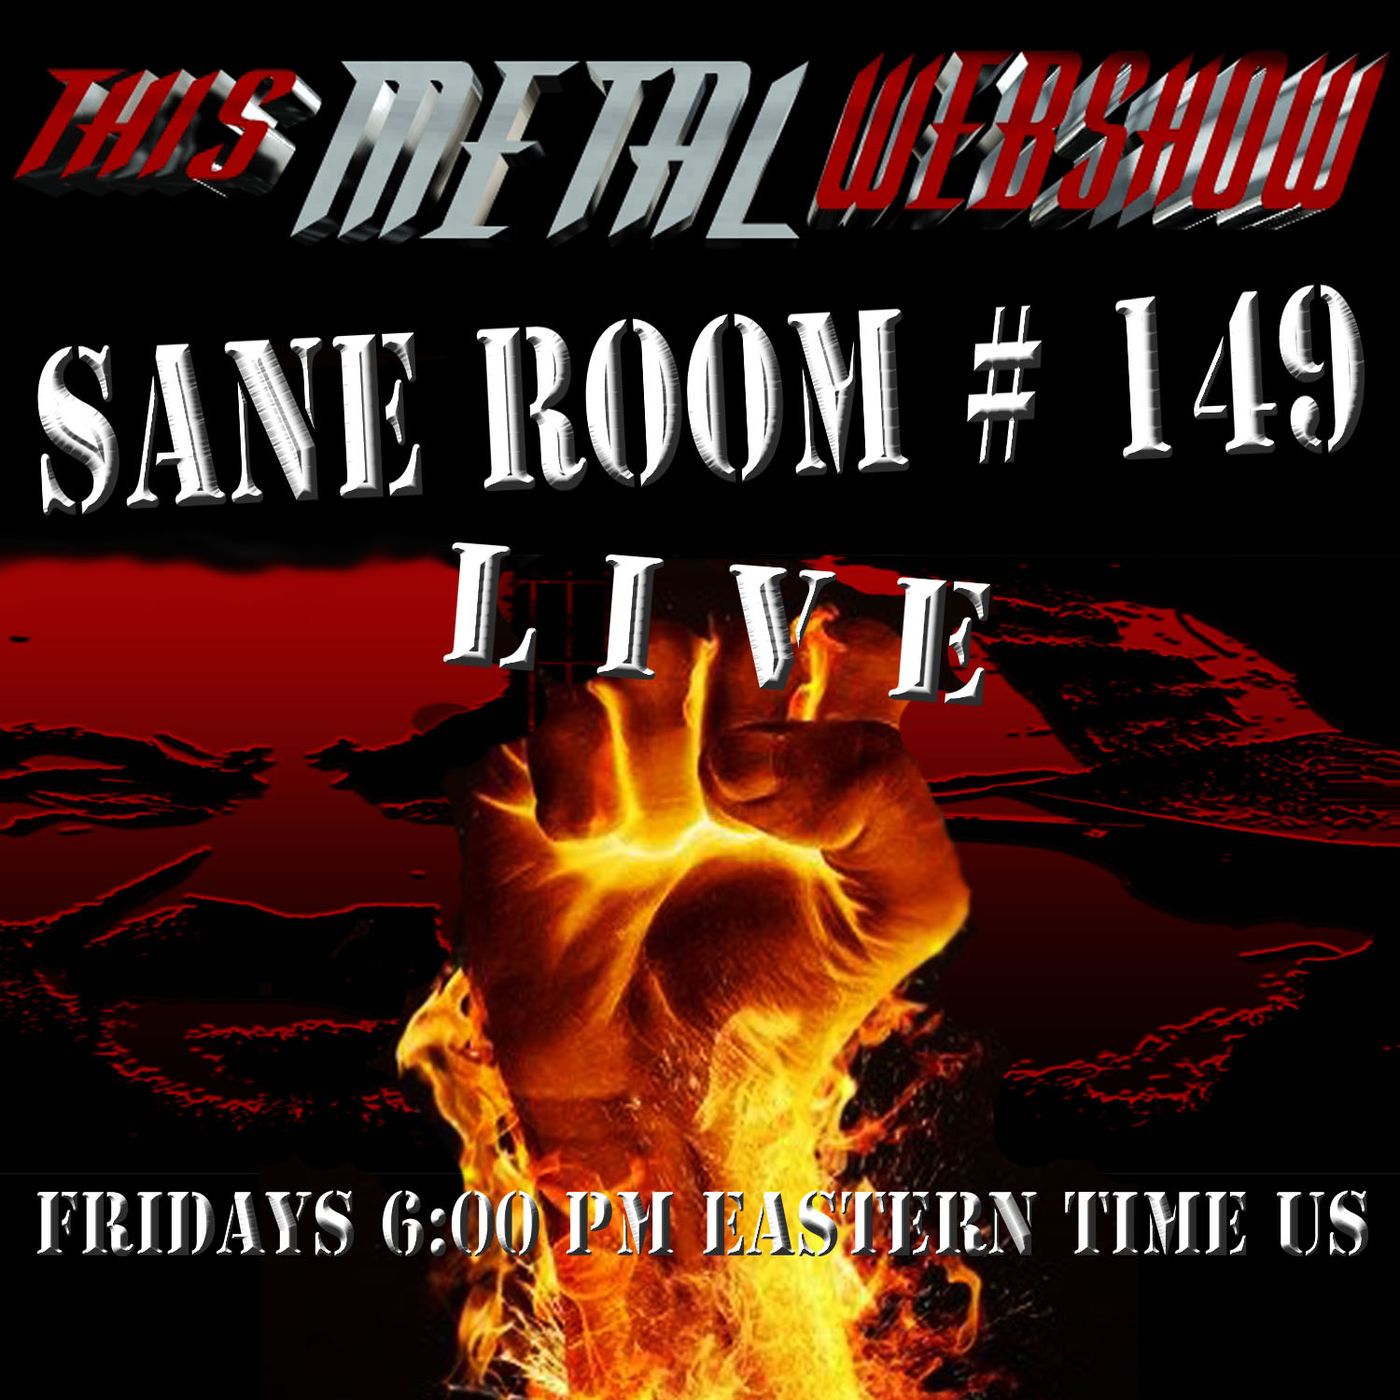 This Metal Webshow Sane Room # 149 LIVE